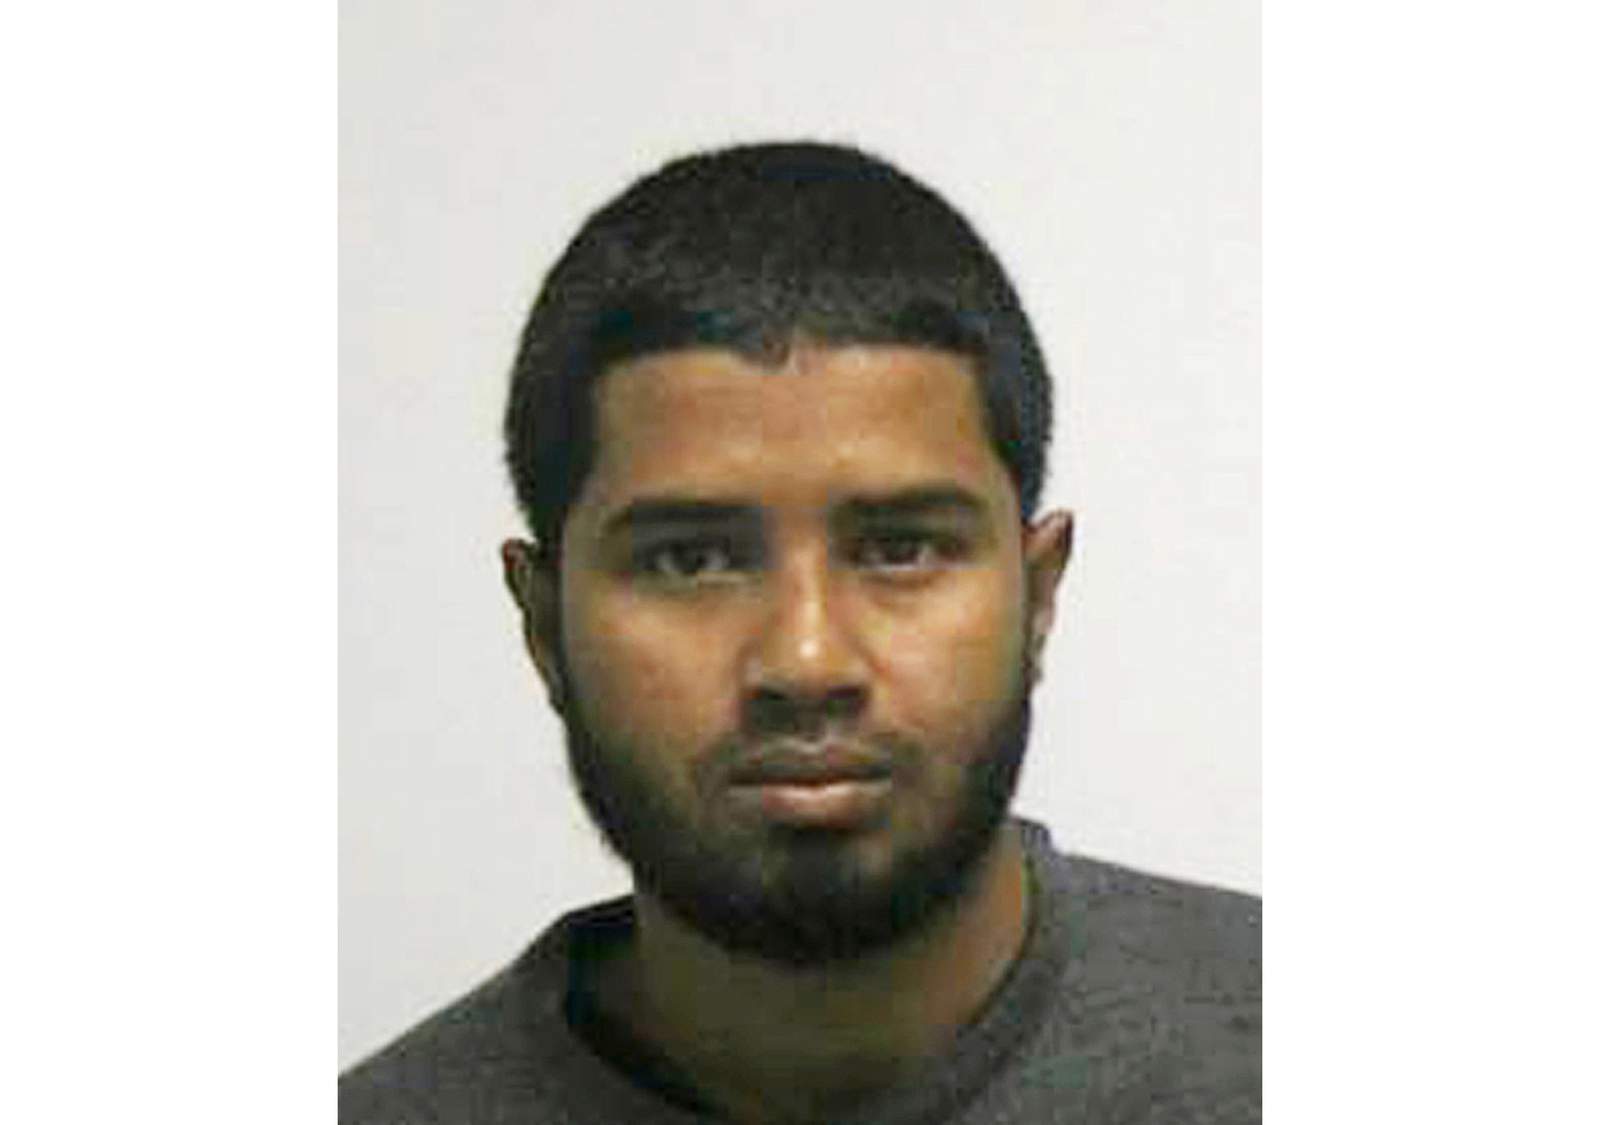 Prosecutors seek life term for would-be NYC suicide bomber